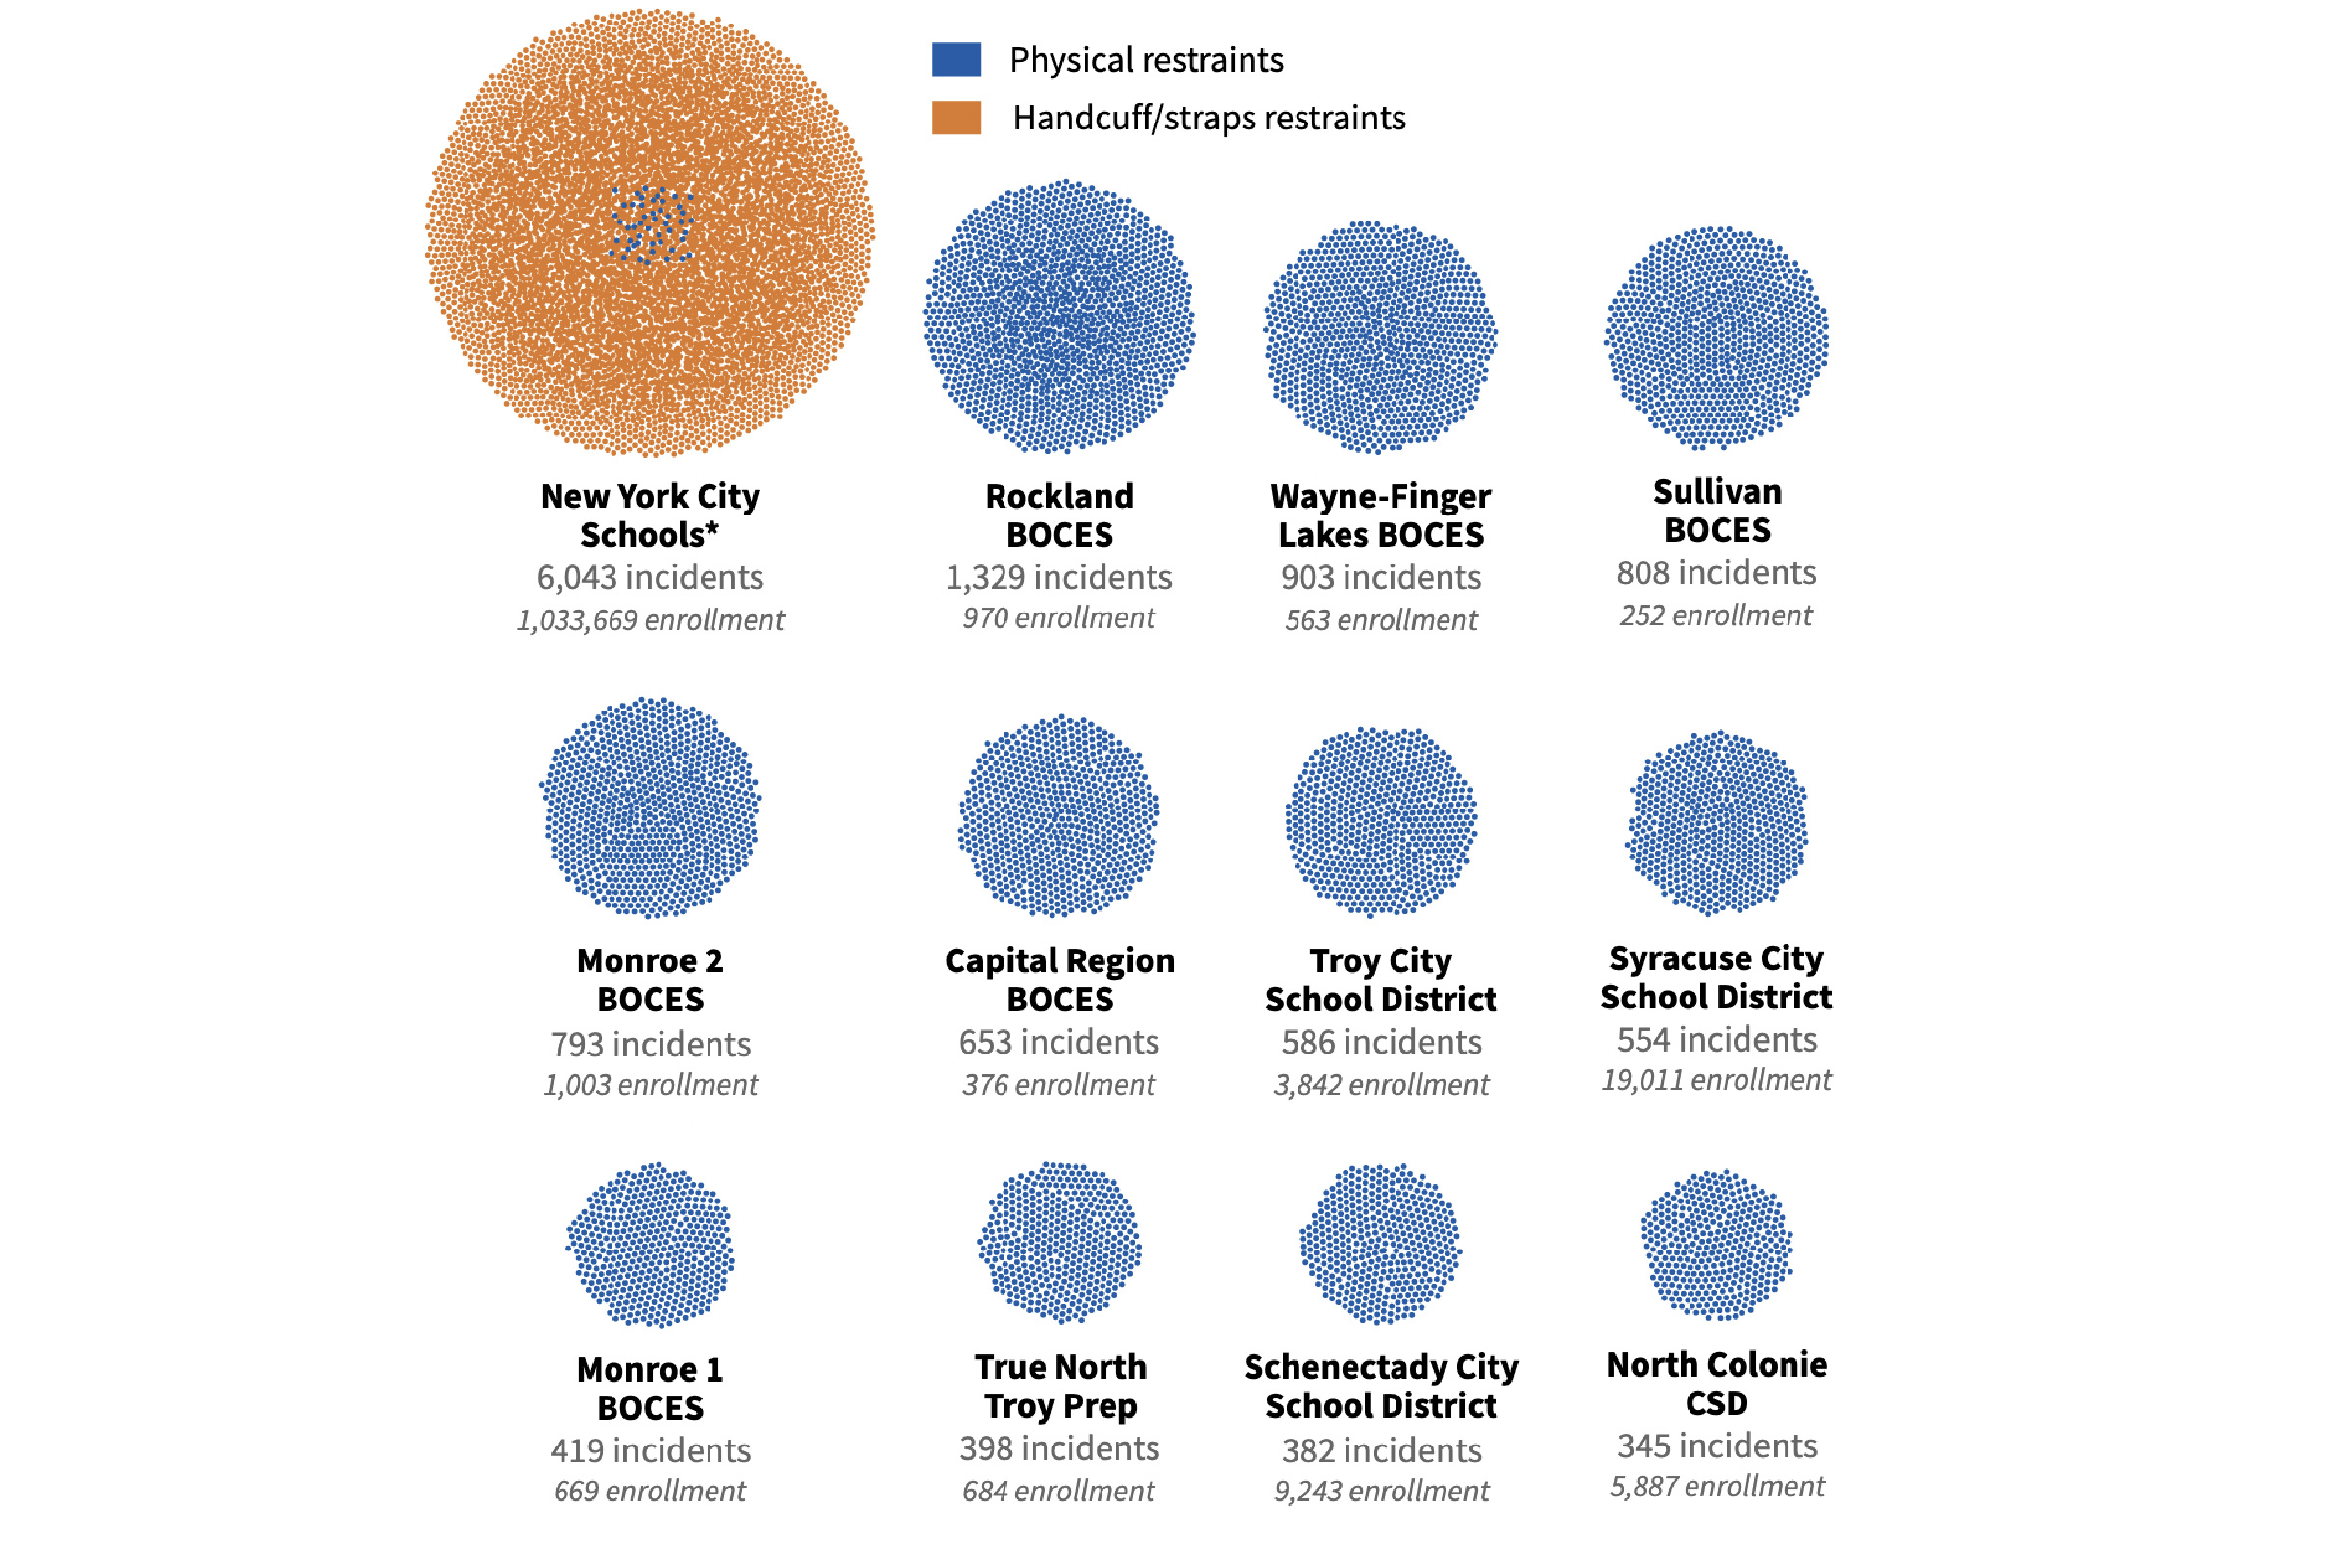 Packed circle chart showing how many restraint incidents at New York school districts.